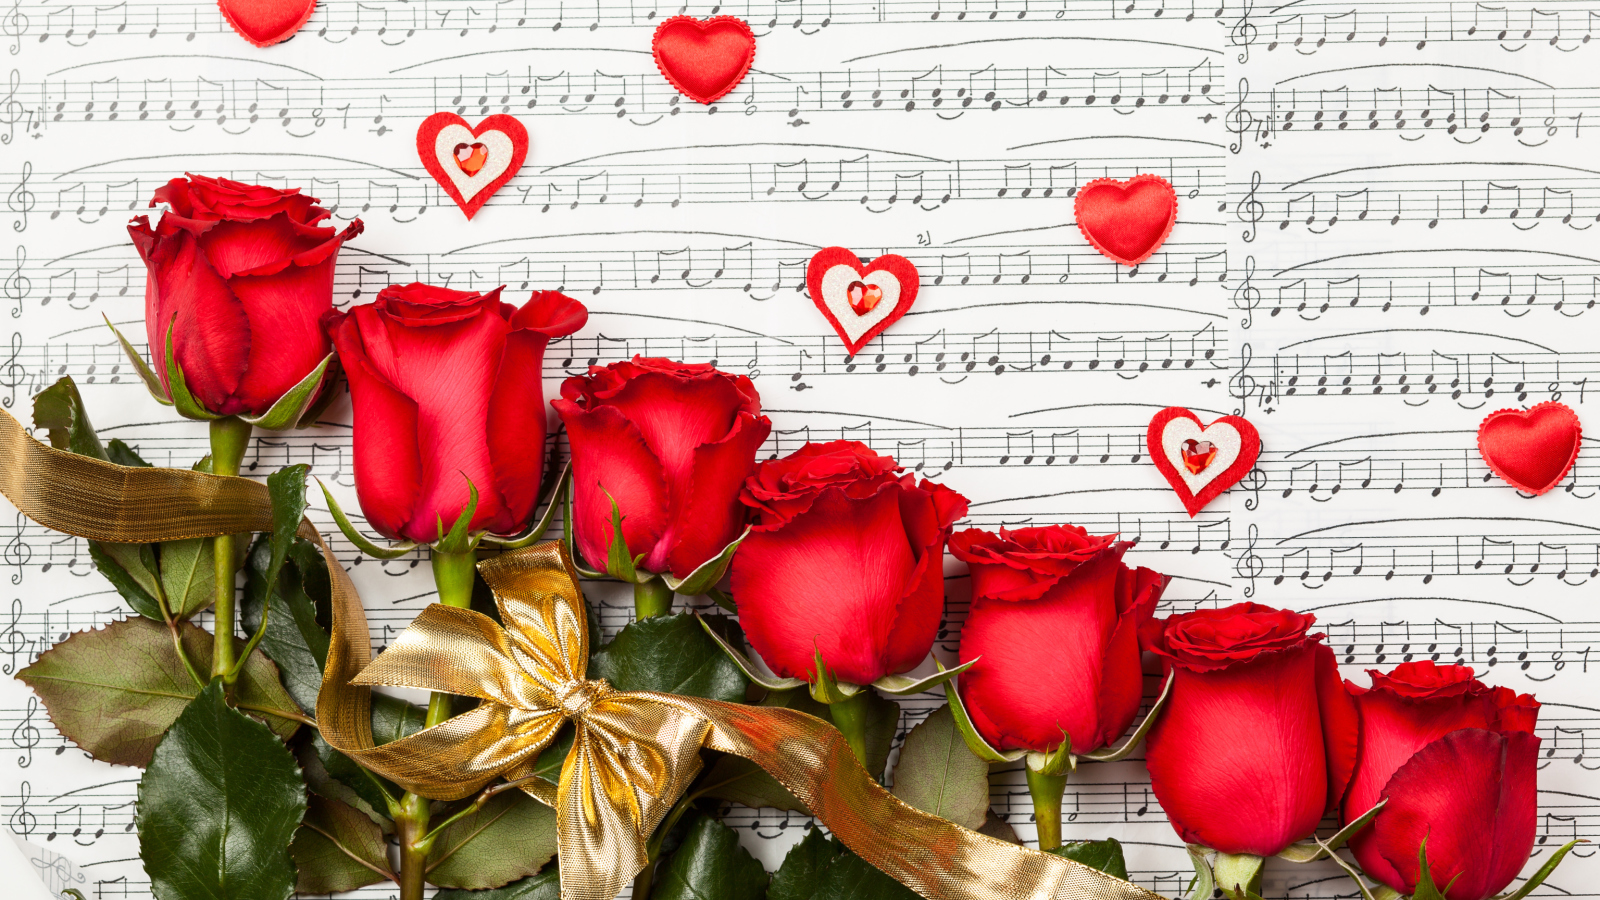 Roses, Love And Music wallpaper 1600x900